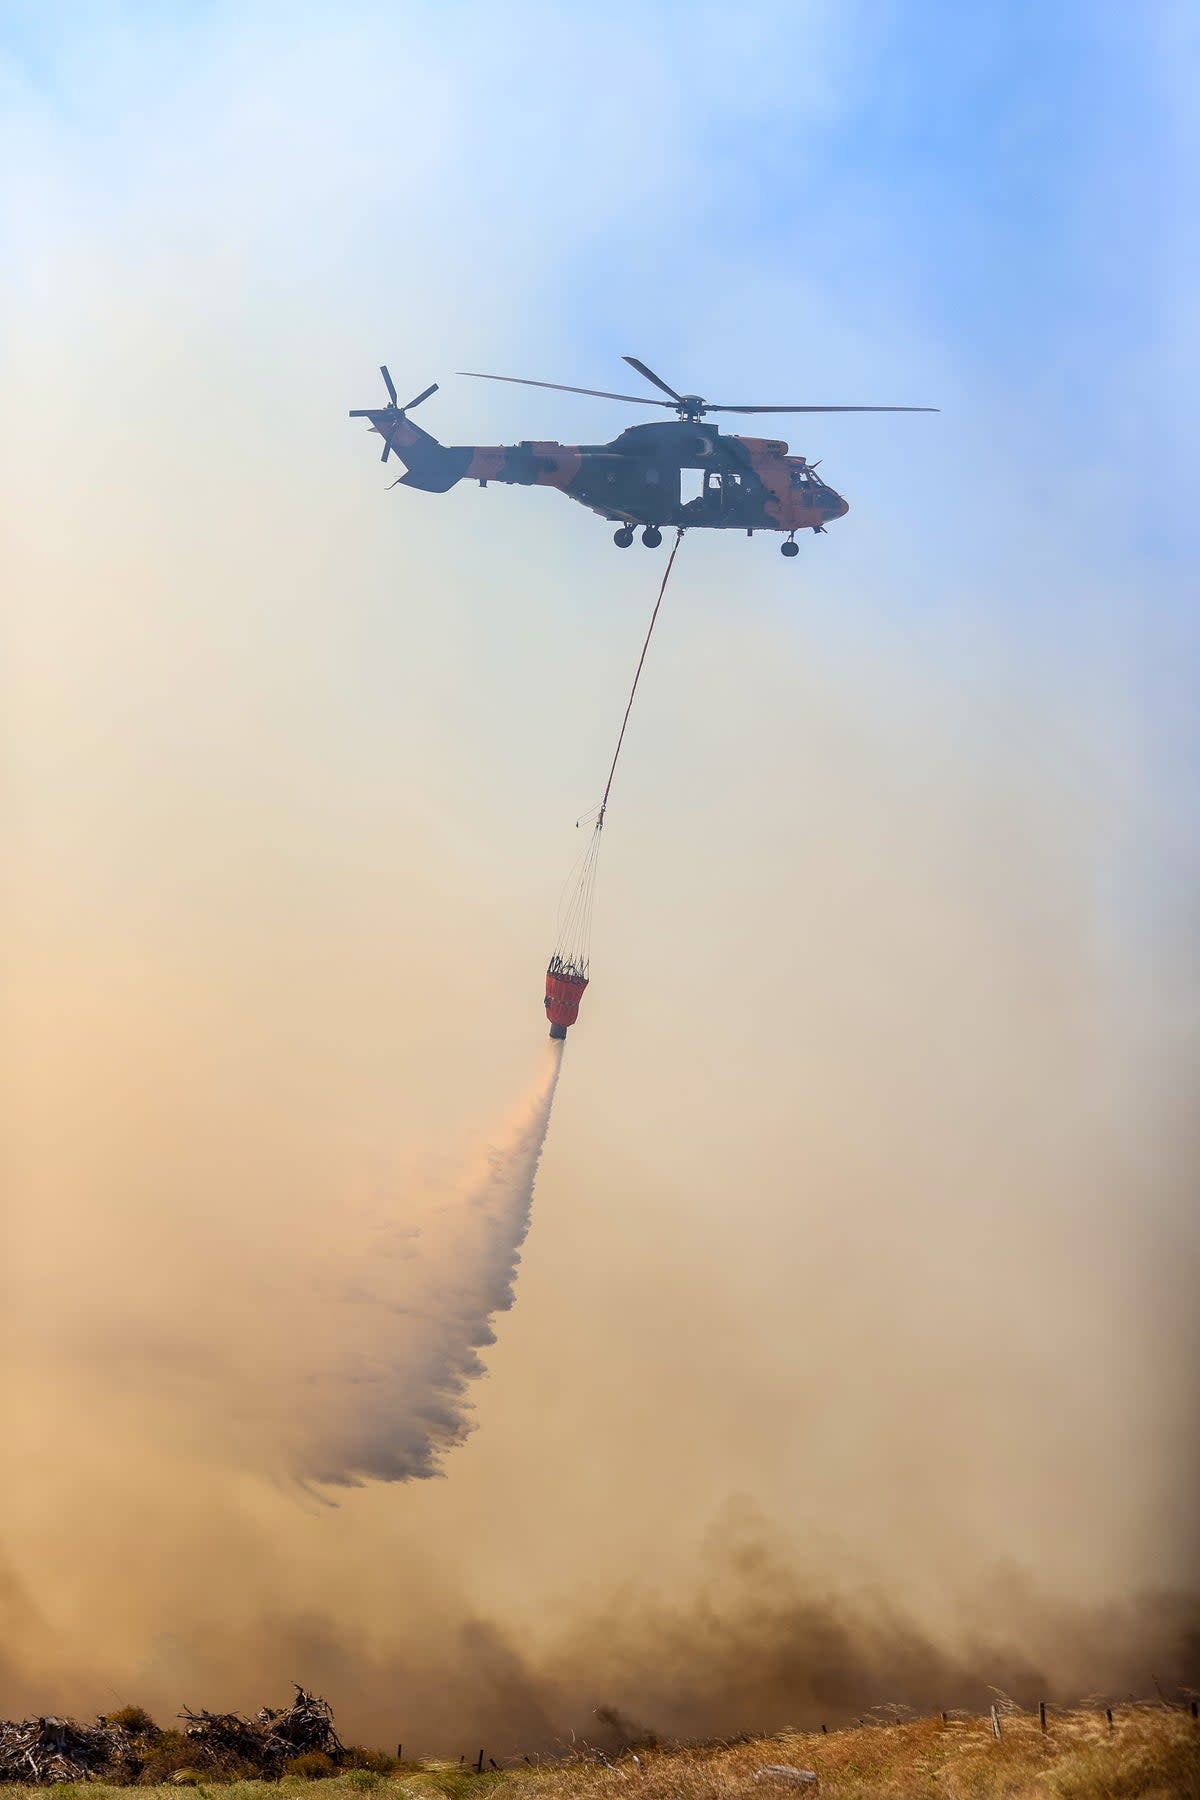 A firefighter helicopter drops water on wildfire as firefighter teams conduct extinguishing works by land and air to control wildfires in Canakkale, Turkiye on July 17, 2023 (Anadolu Agency via Getty Images)